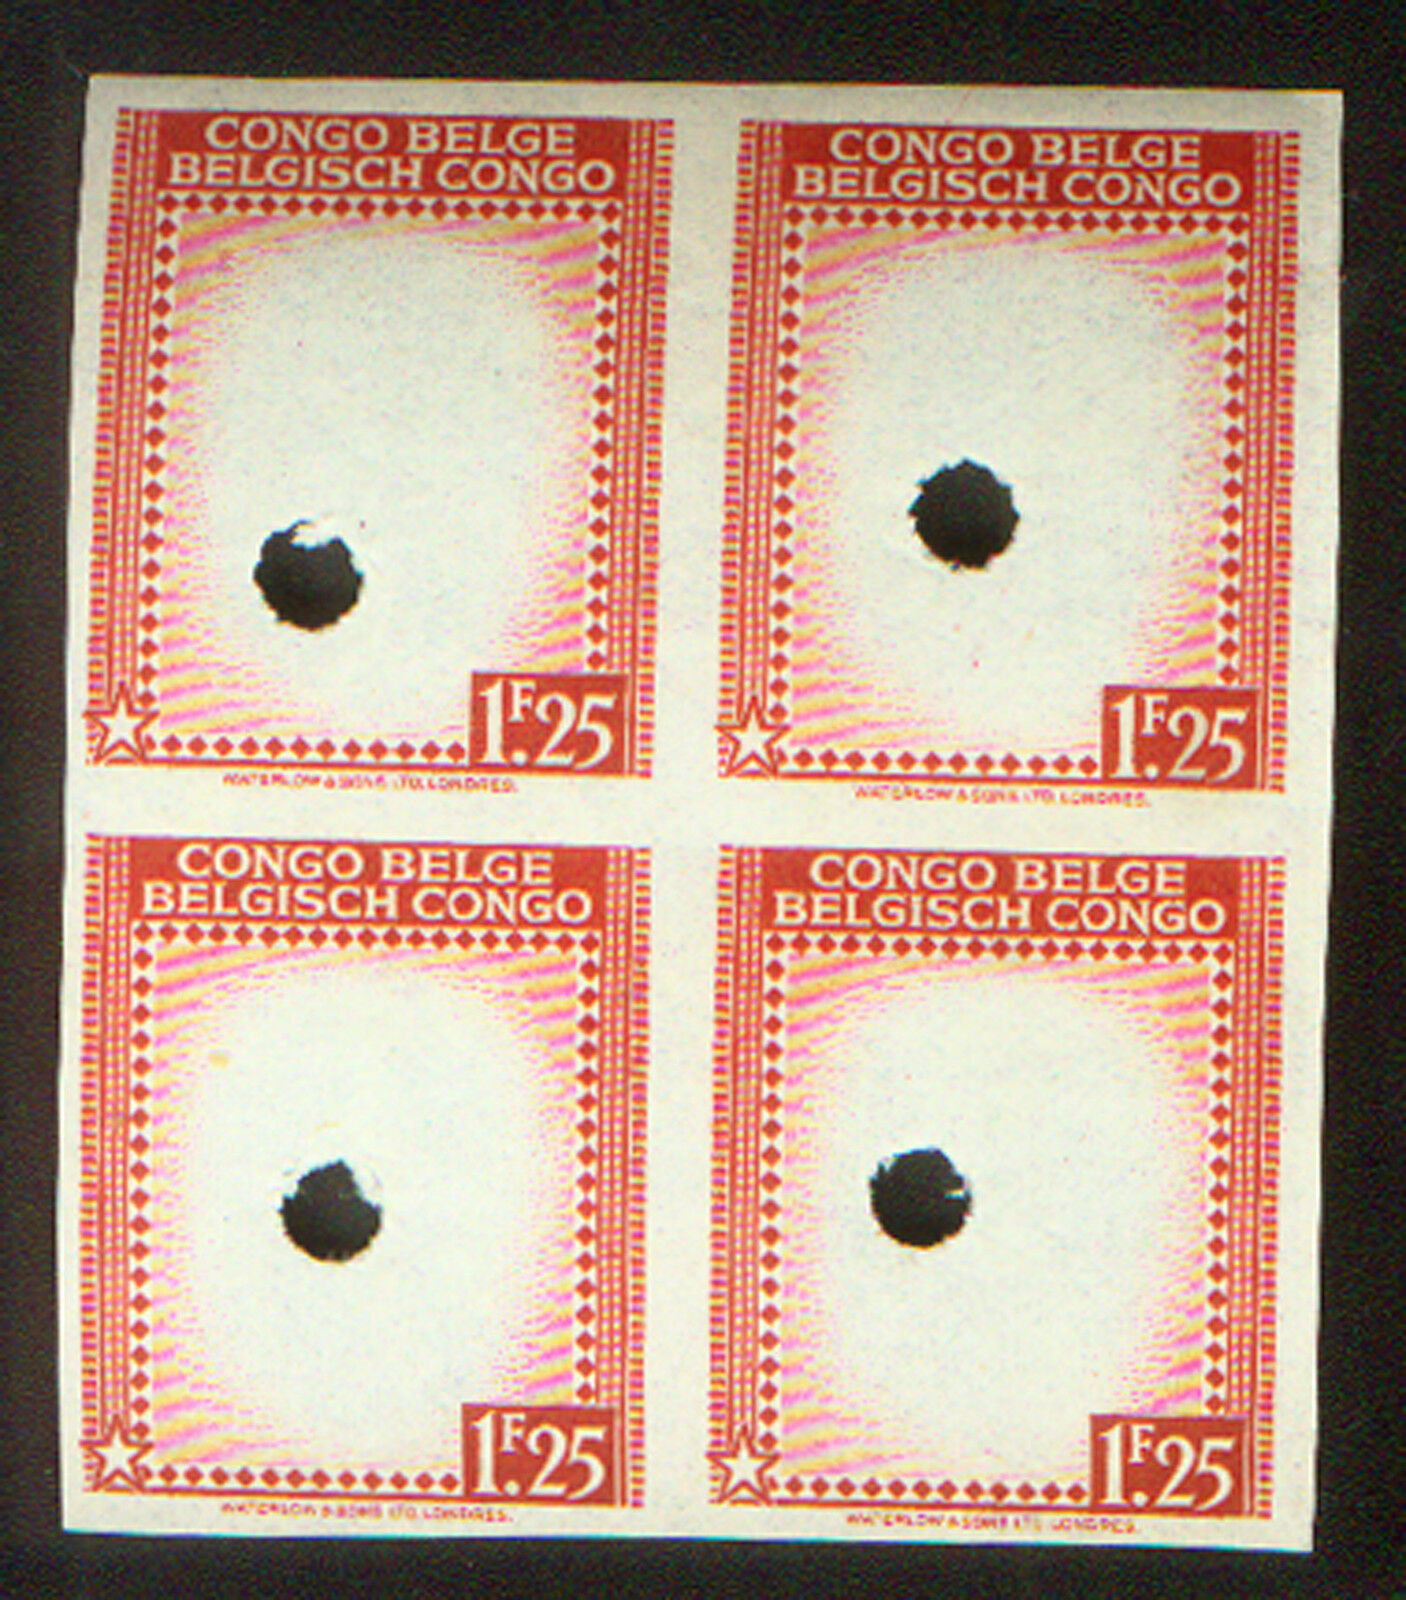 BELGIAN CONGO 1F25 BLOCK PRINTER PROOFS by WATERLOW & SONS HOLE PUNCHED of 1942